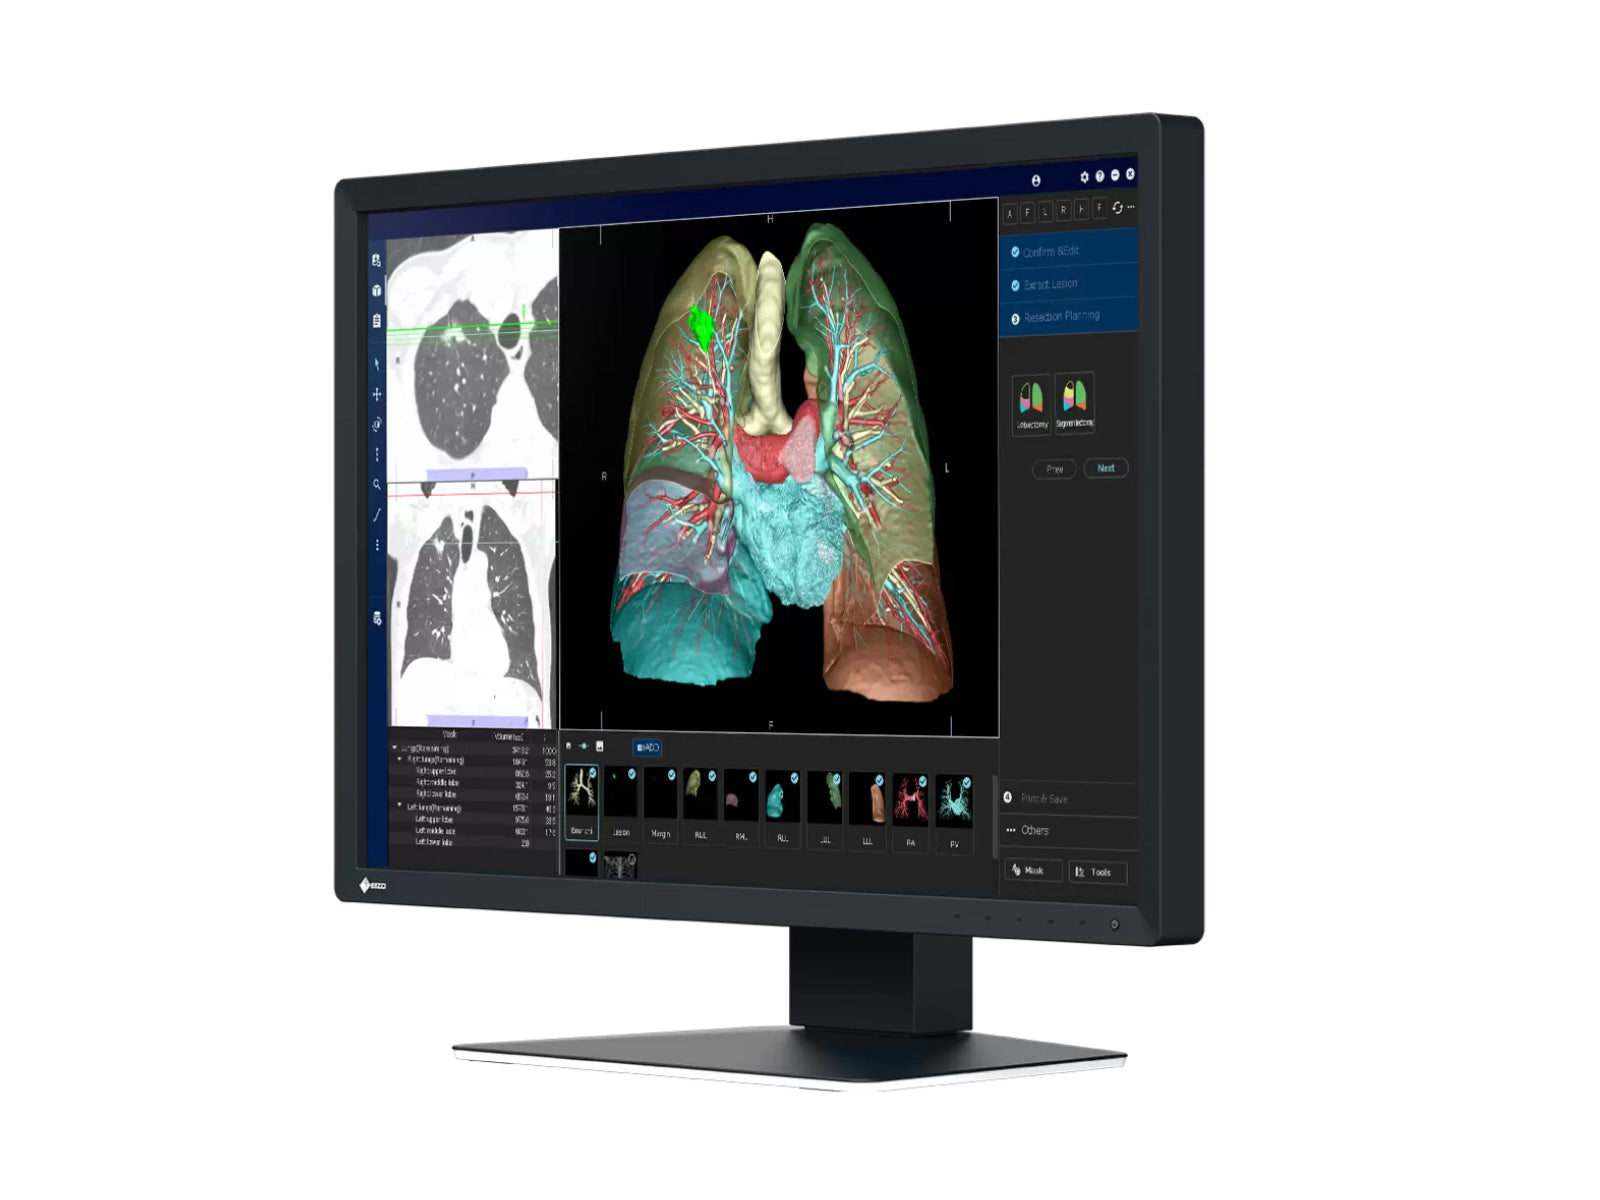 Eizo RadiForce MX243W 2.3MP 24" Color LED Clinical Review Display (MX243W)